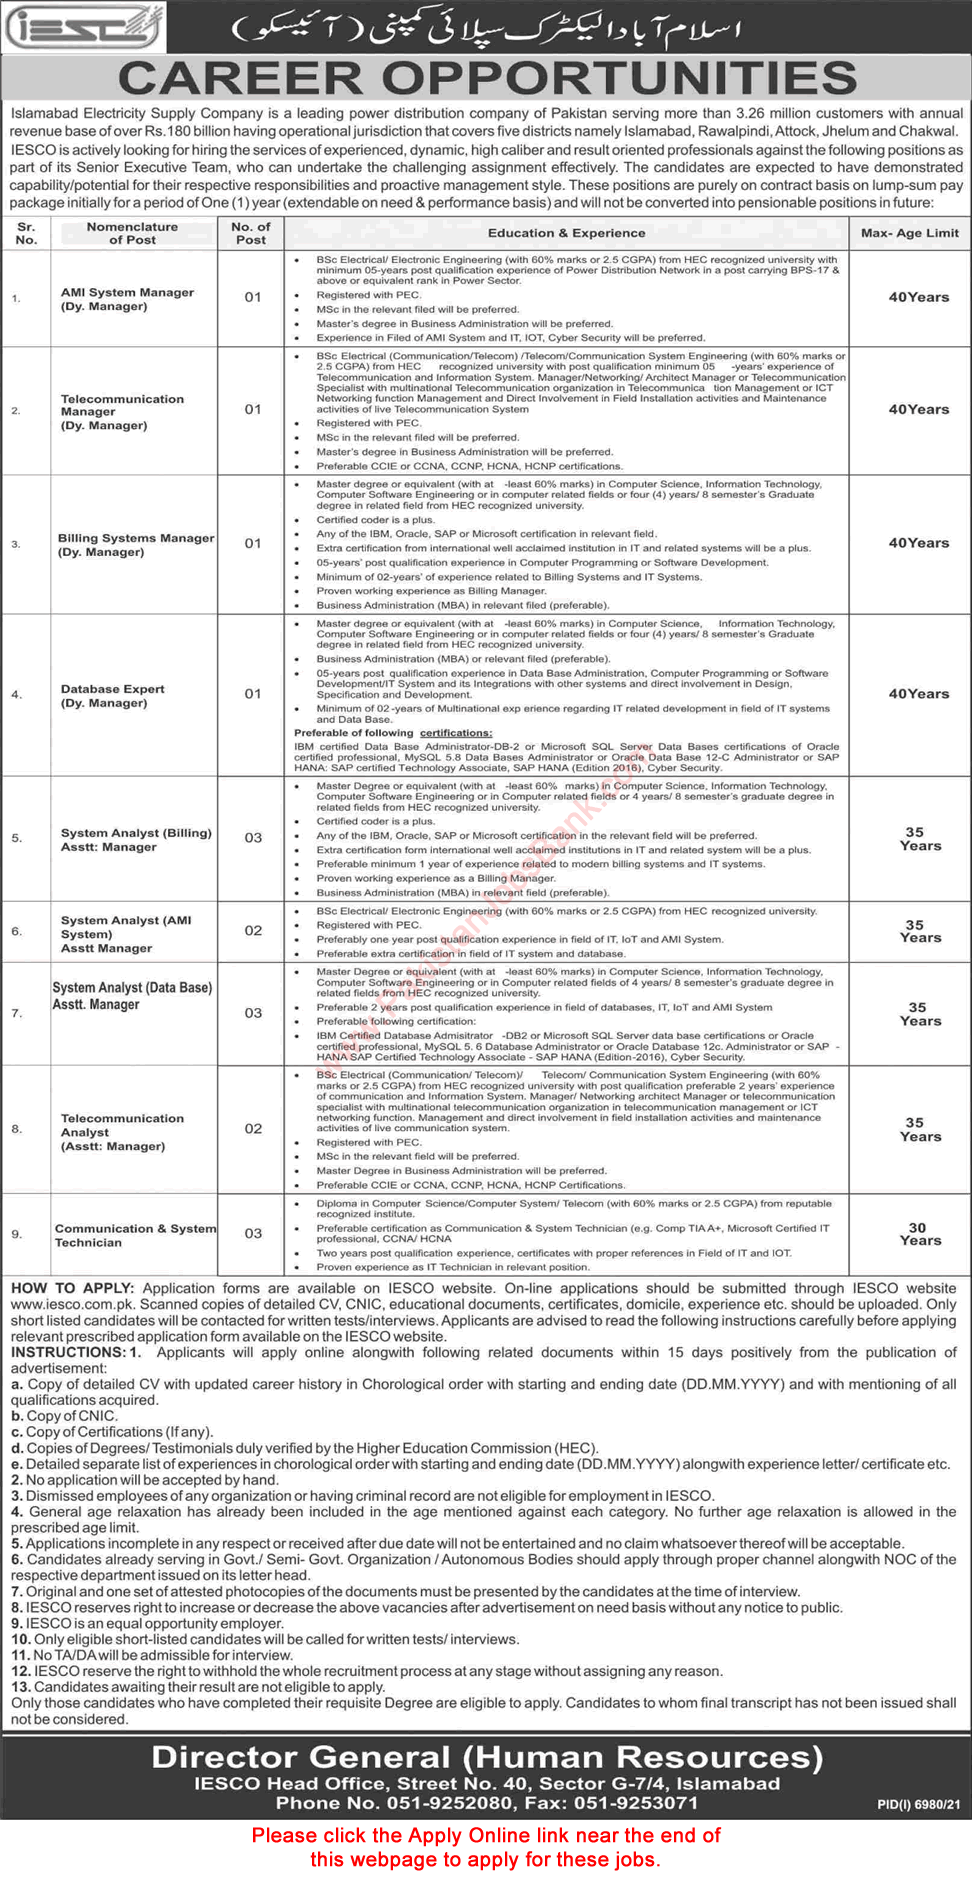 IESCO Jobs April 2022 WAPDA Apply Online Islamabad Electric Supply Company Assistant Managers & Others Latest